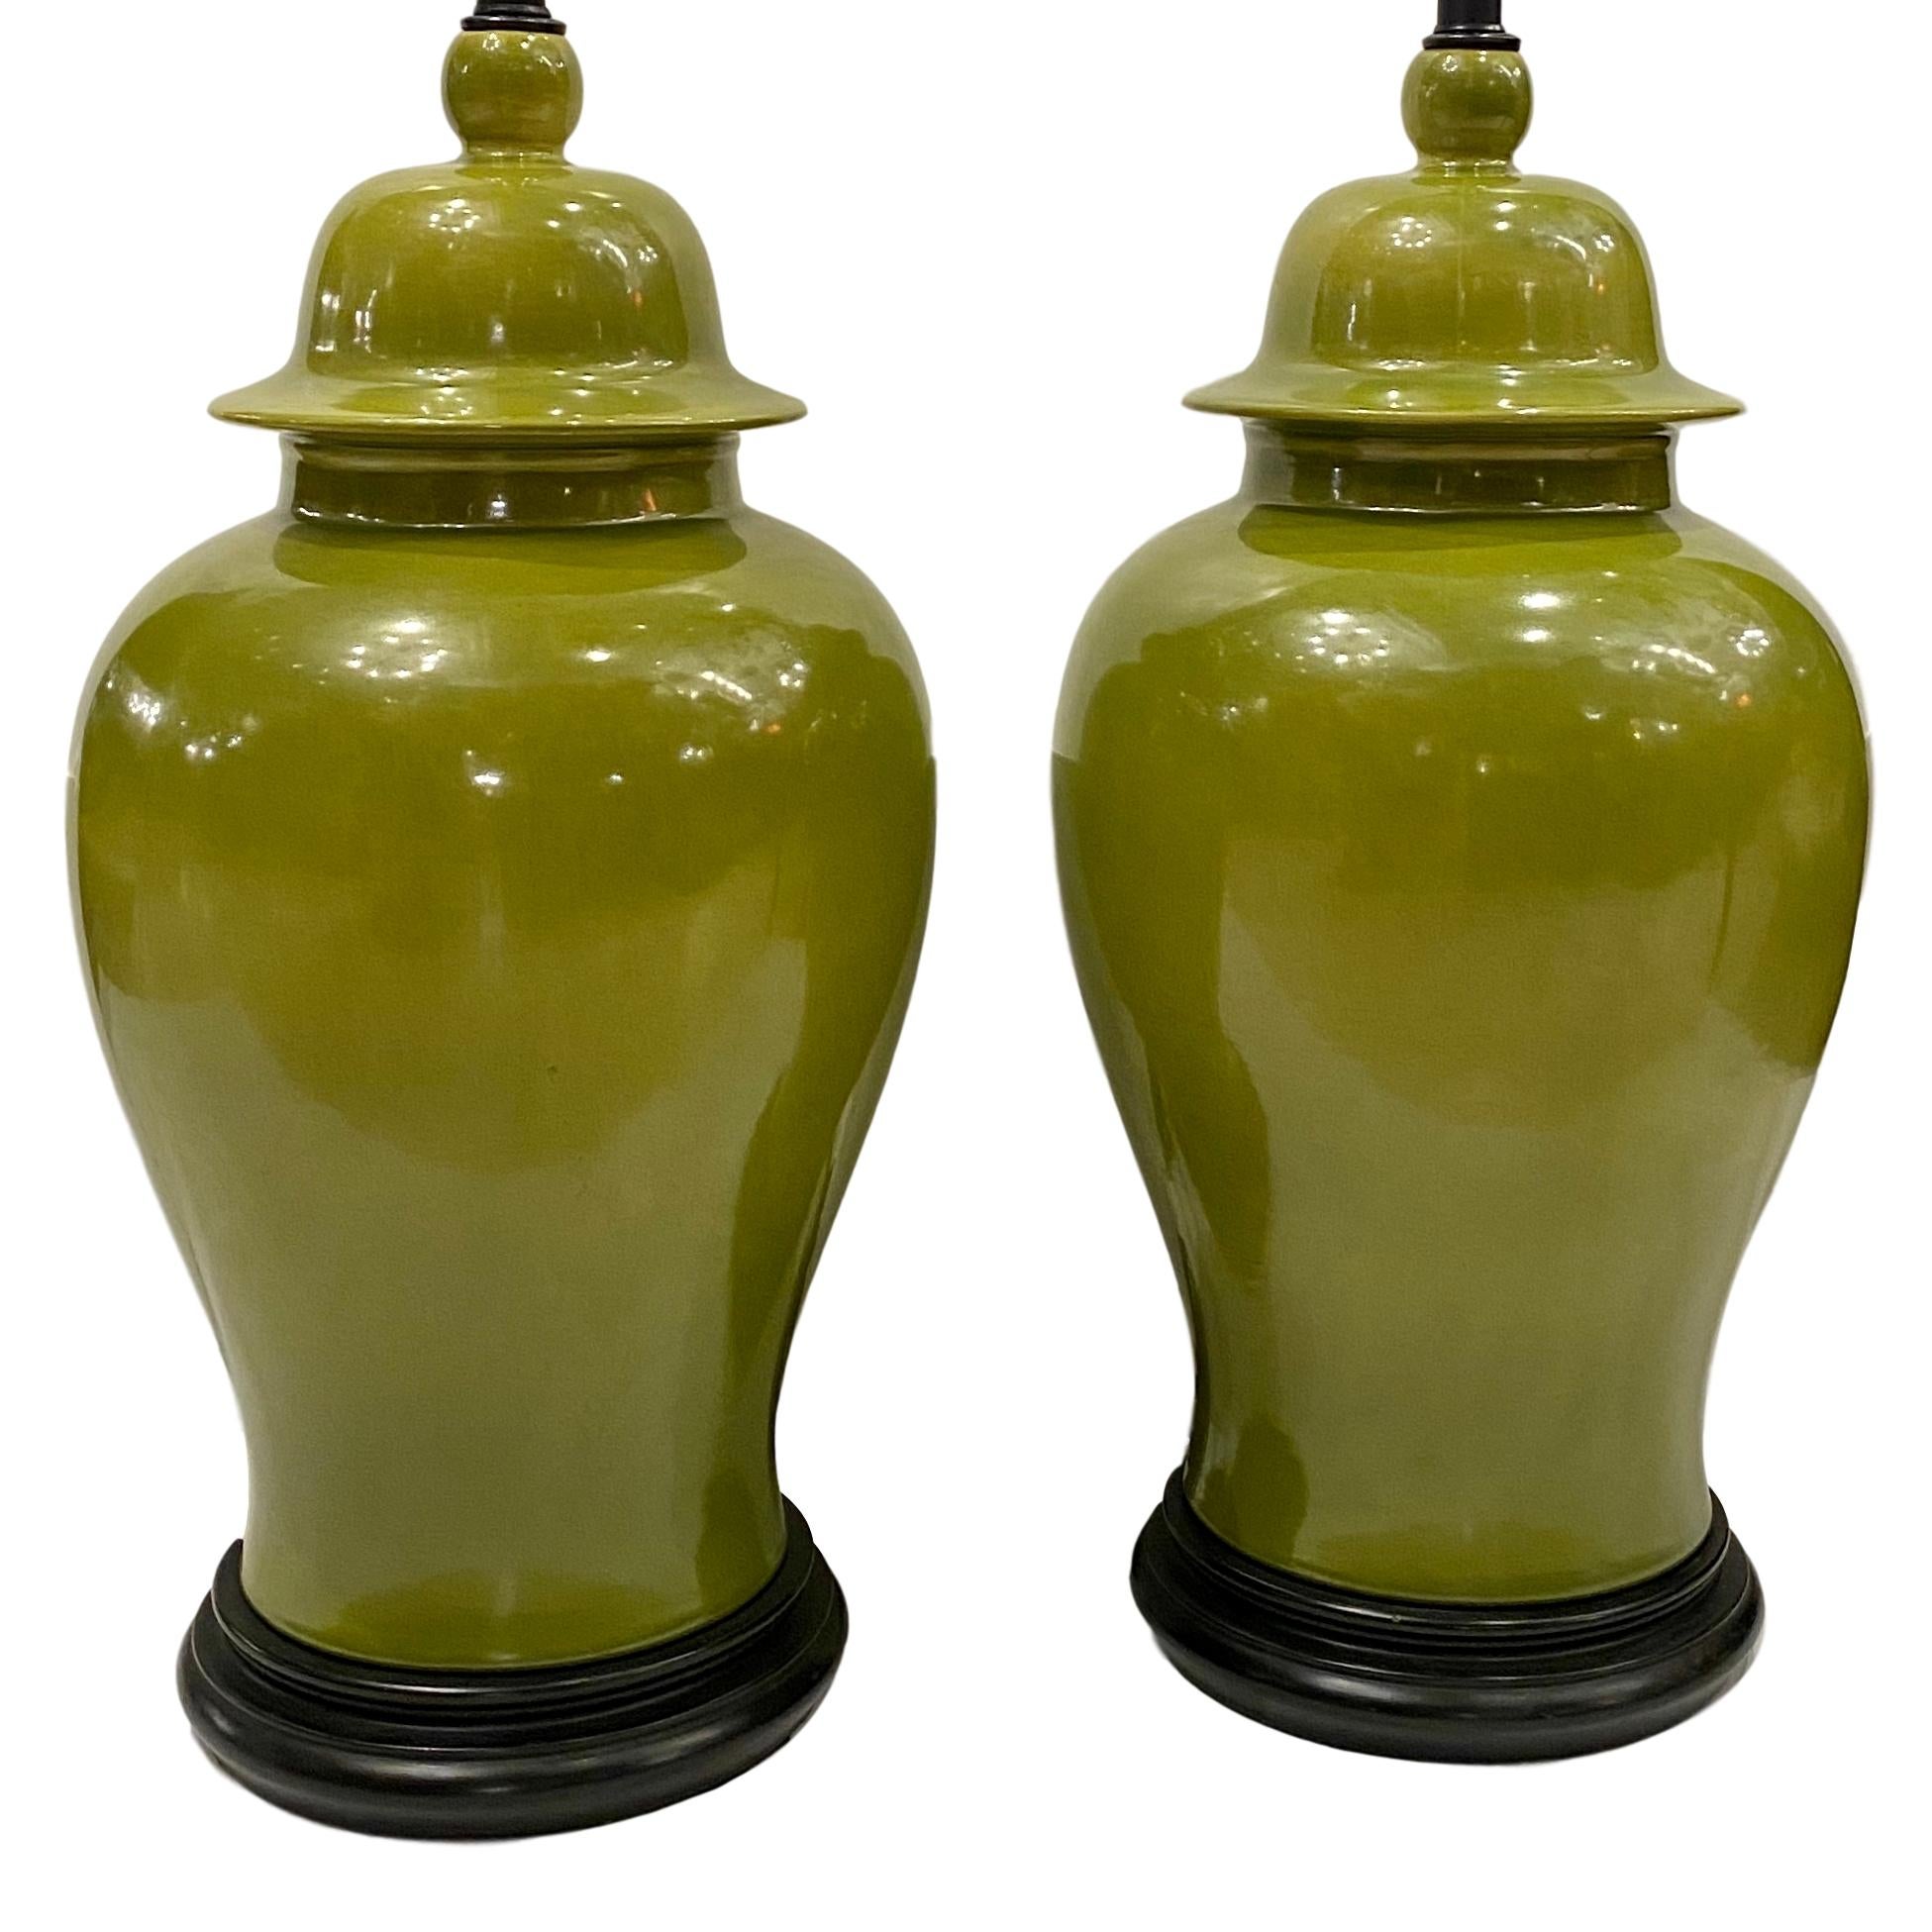 Pair of circa 1940s French porcelain table lamps in the form of large ginger jars.

Measurements:
Height of body 23